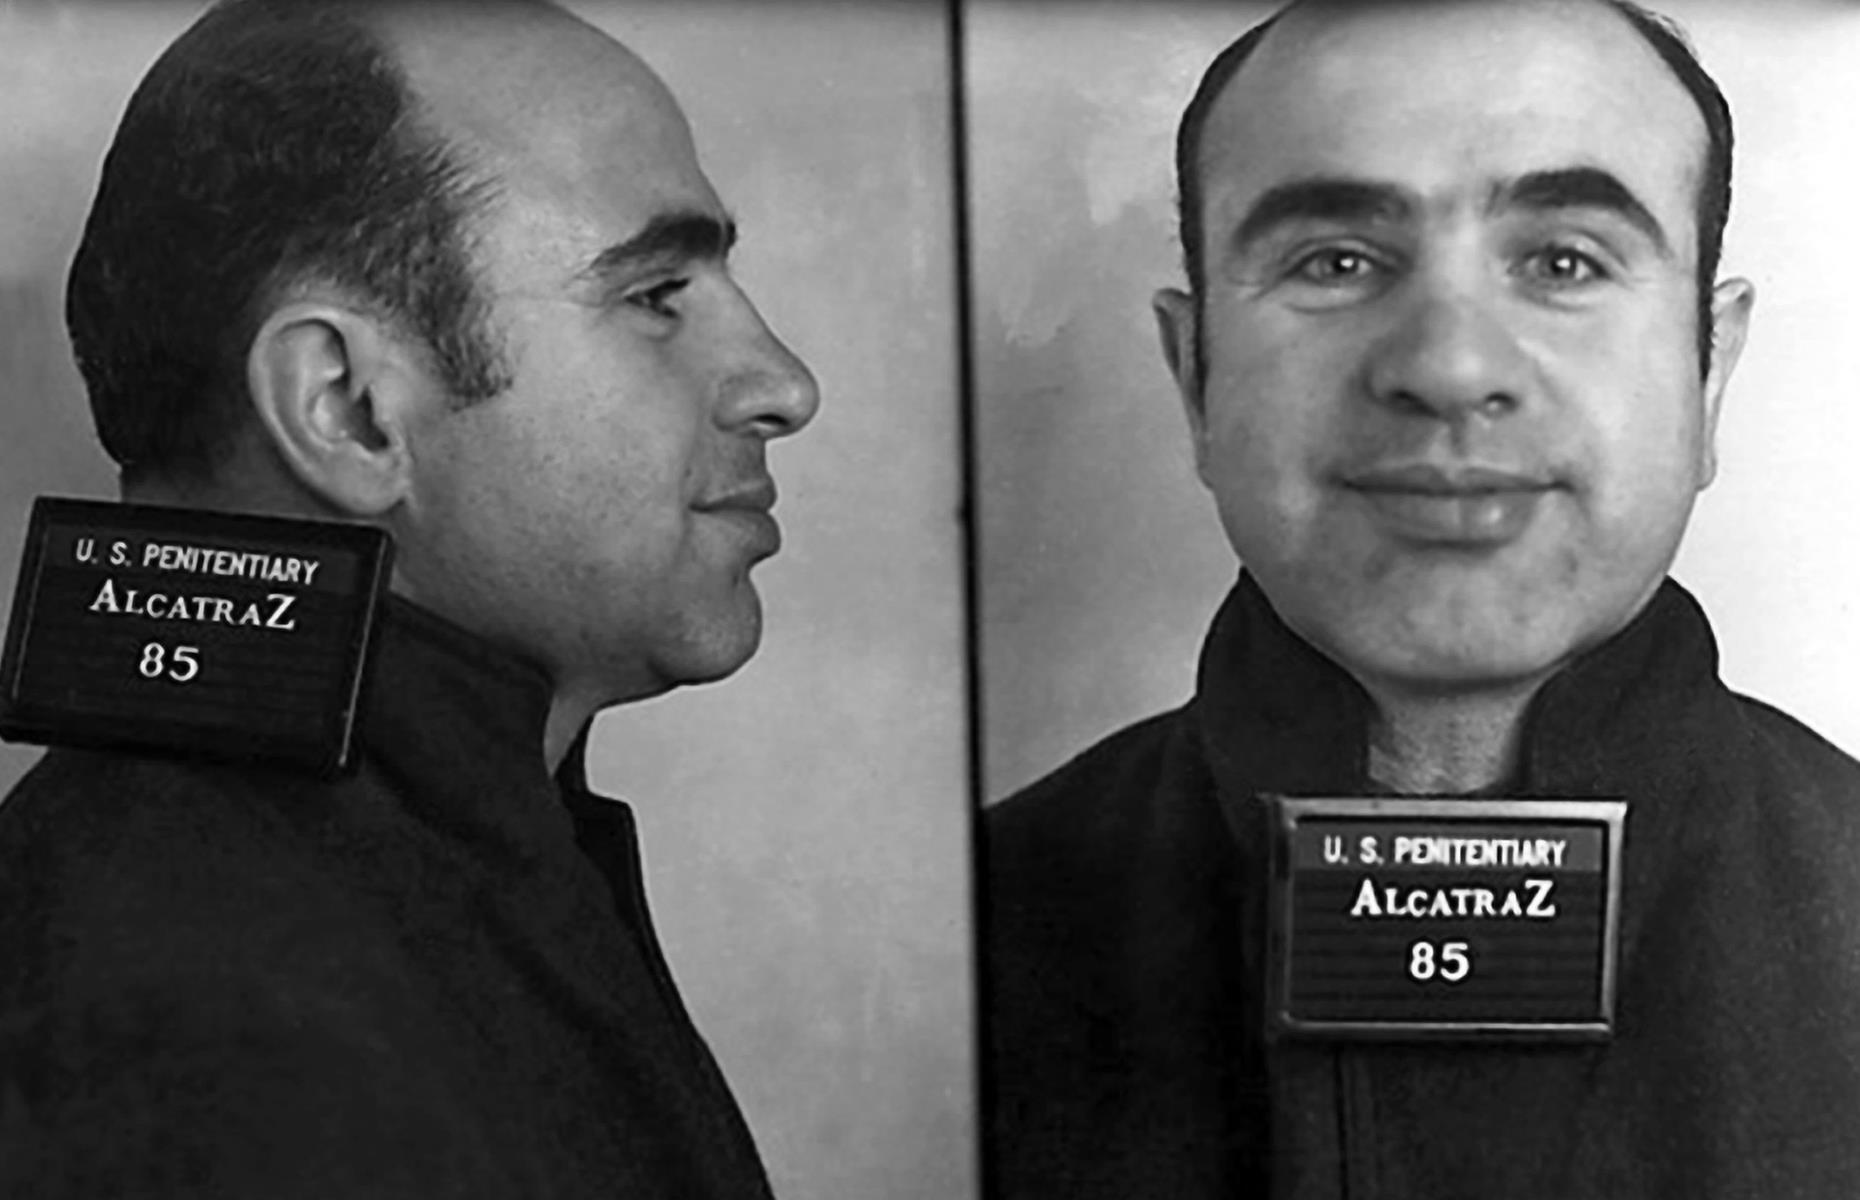 <p>Of all the formidable prisoners confined at Alcatraz, perhaps no one is more famous than Al Capone. The Chicago gangster's criminal pedigree was seemingly endless – bootlegging, gambling, robbery, murder and more – and for seven years he controlled one of America's deadliest and most influential crime rings. He was first arrested in 1929 in Philadelphia for carrying a concealed weapon, but was released from prison just nine months later for good behaviour.</p>